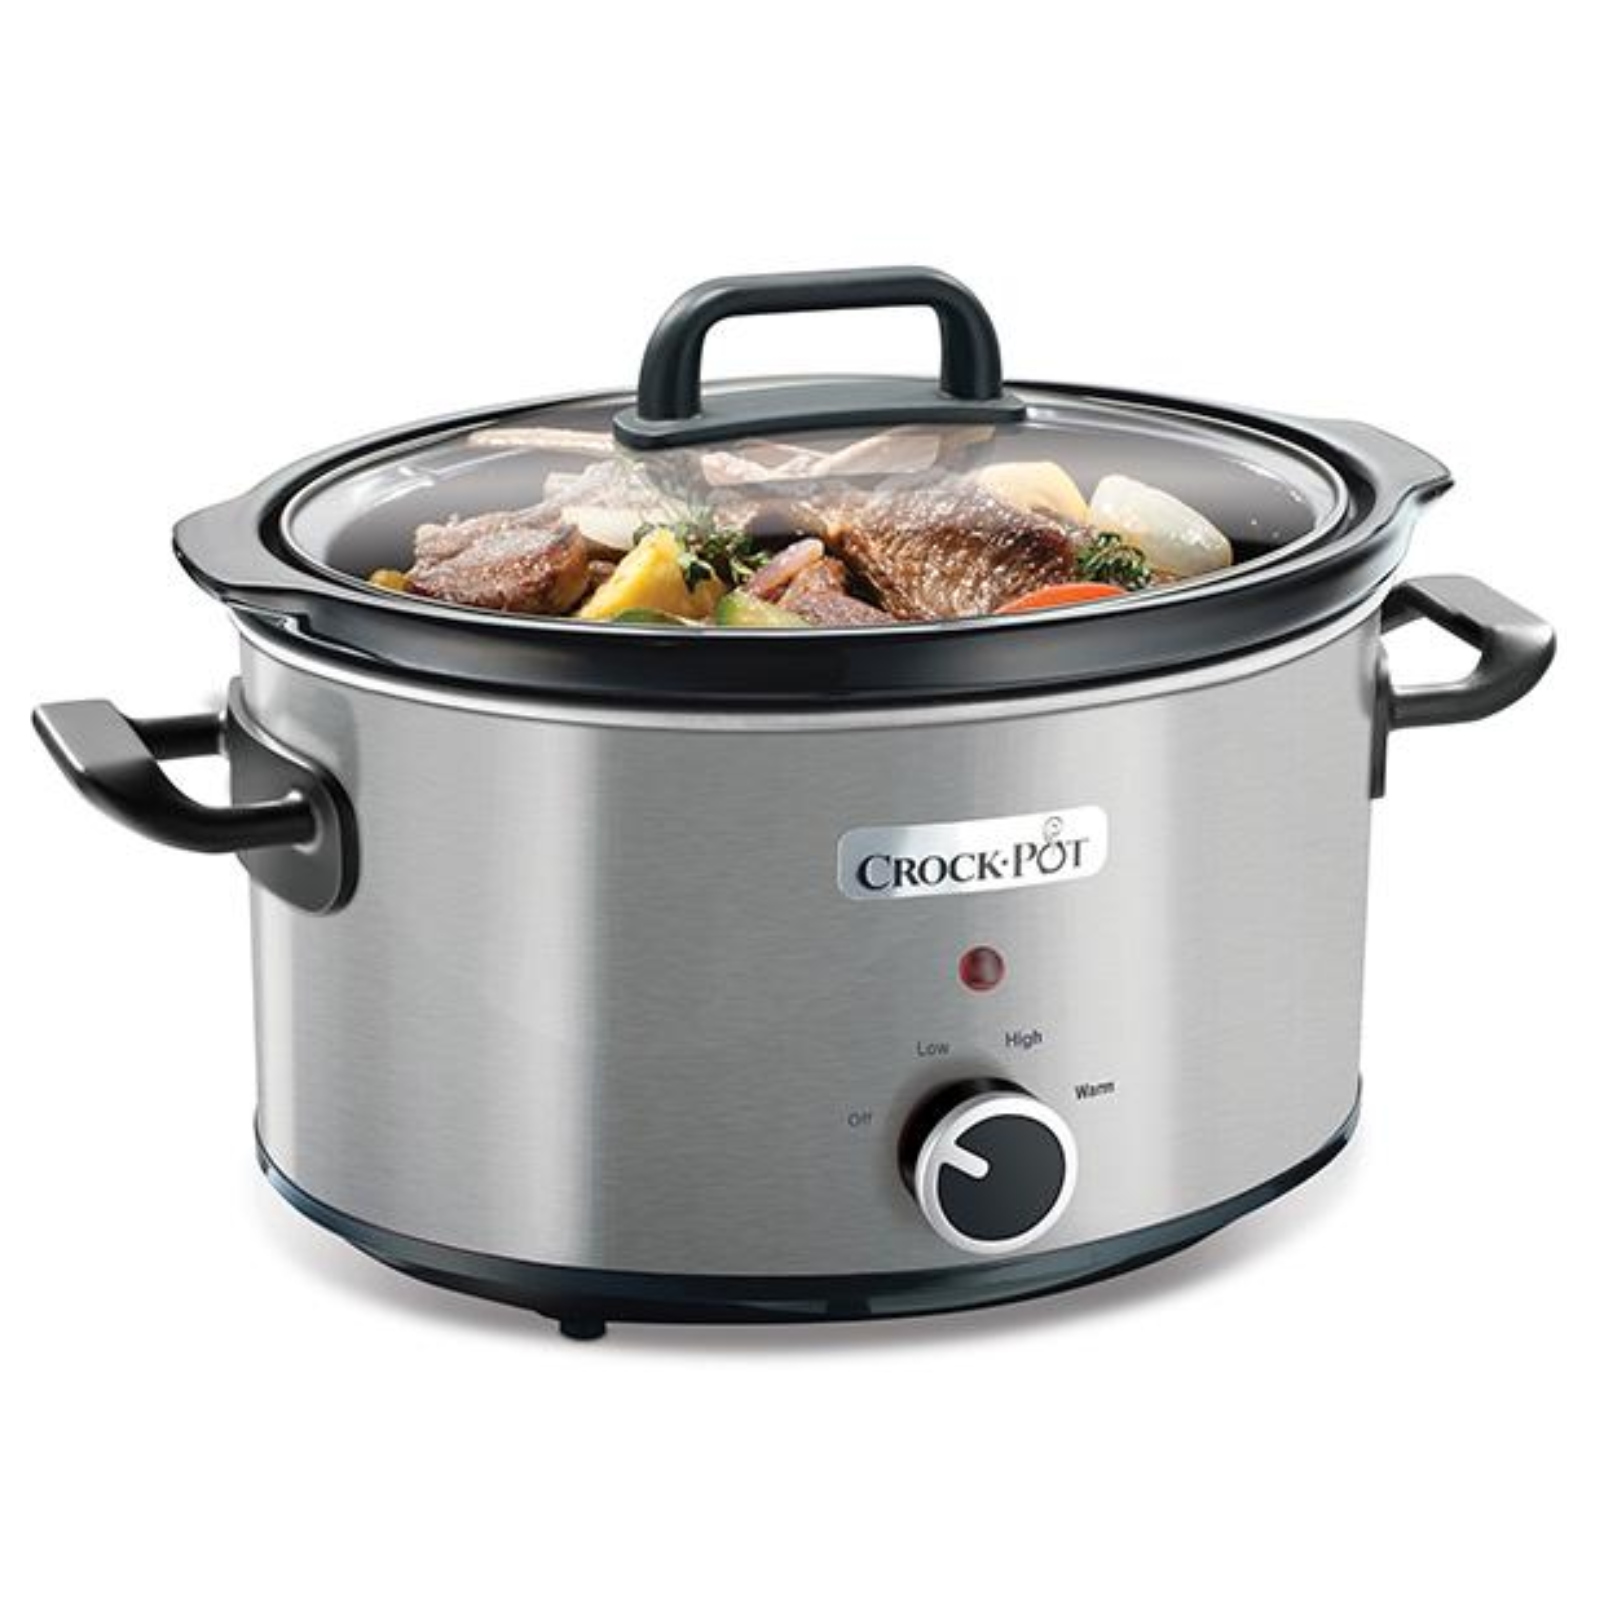 Crock-Pot CSC025 Slow Cooker, 3.5 Litre, Stainless Steel - Kettle and ...